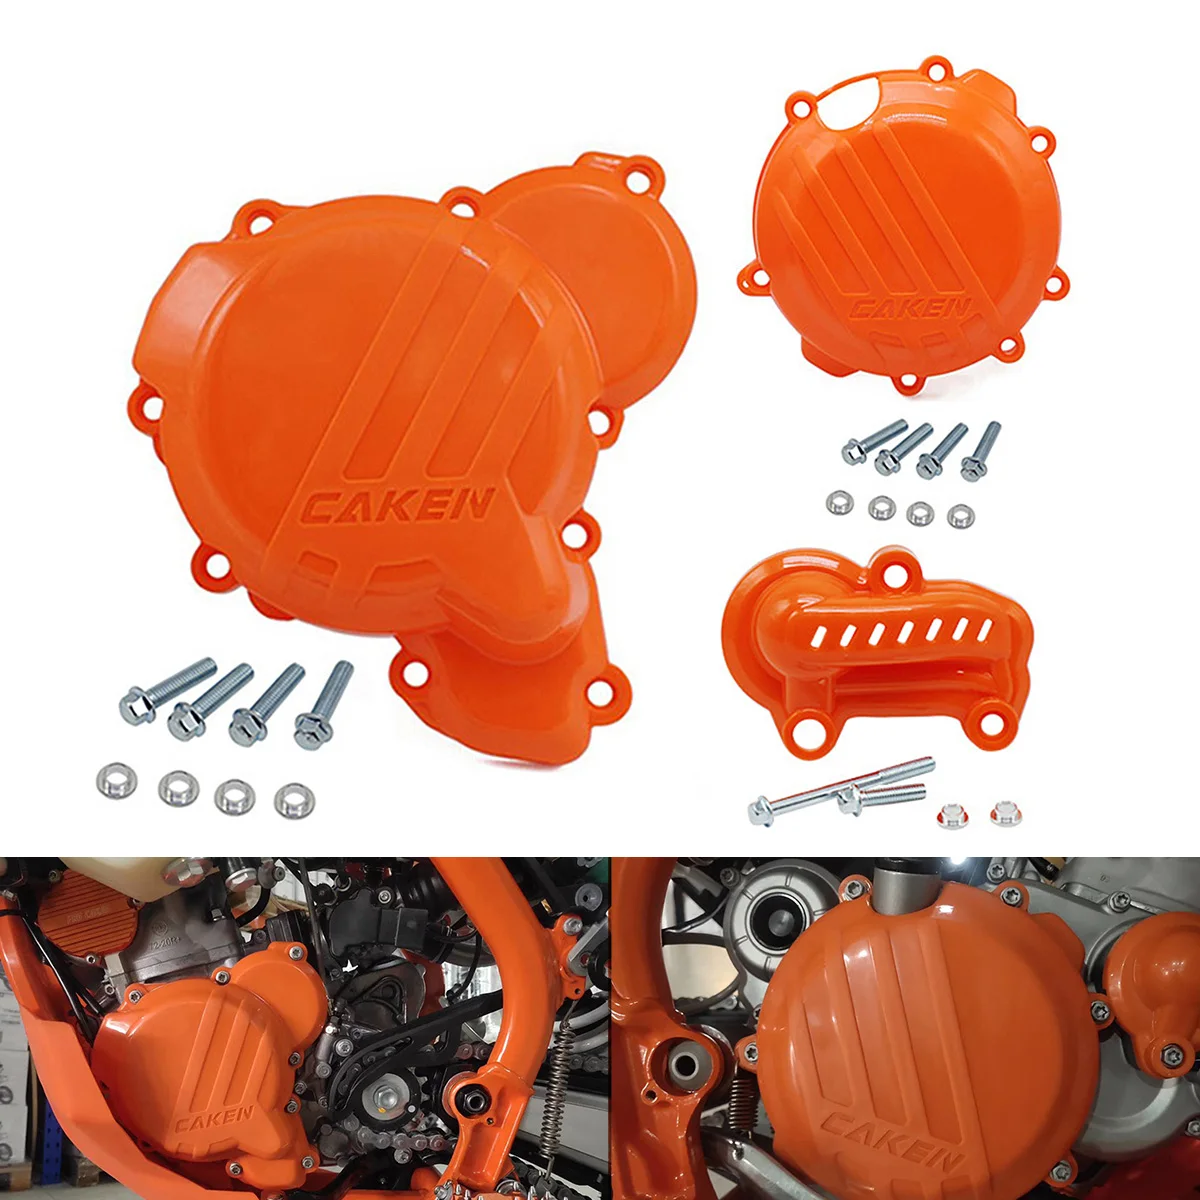 Motorcycle Engine Clutch Guard Water Pump Cover Ignition Protector For KTM EXC TPI 250 300 SX XC XCW TC TX TE 2019-2020 2021 22